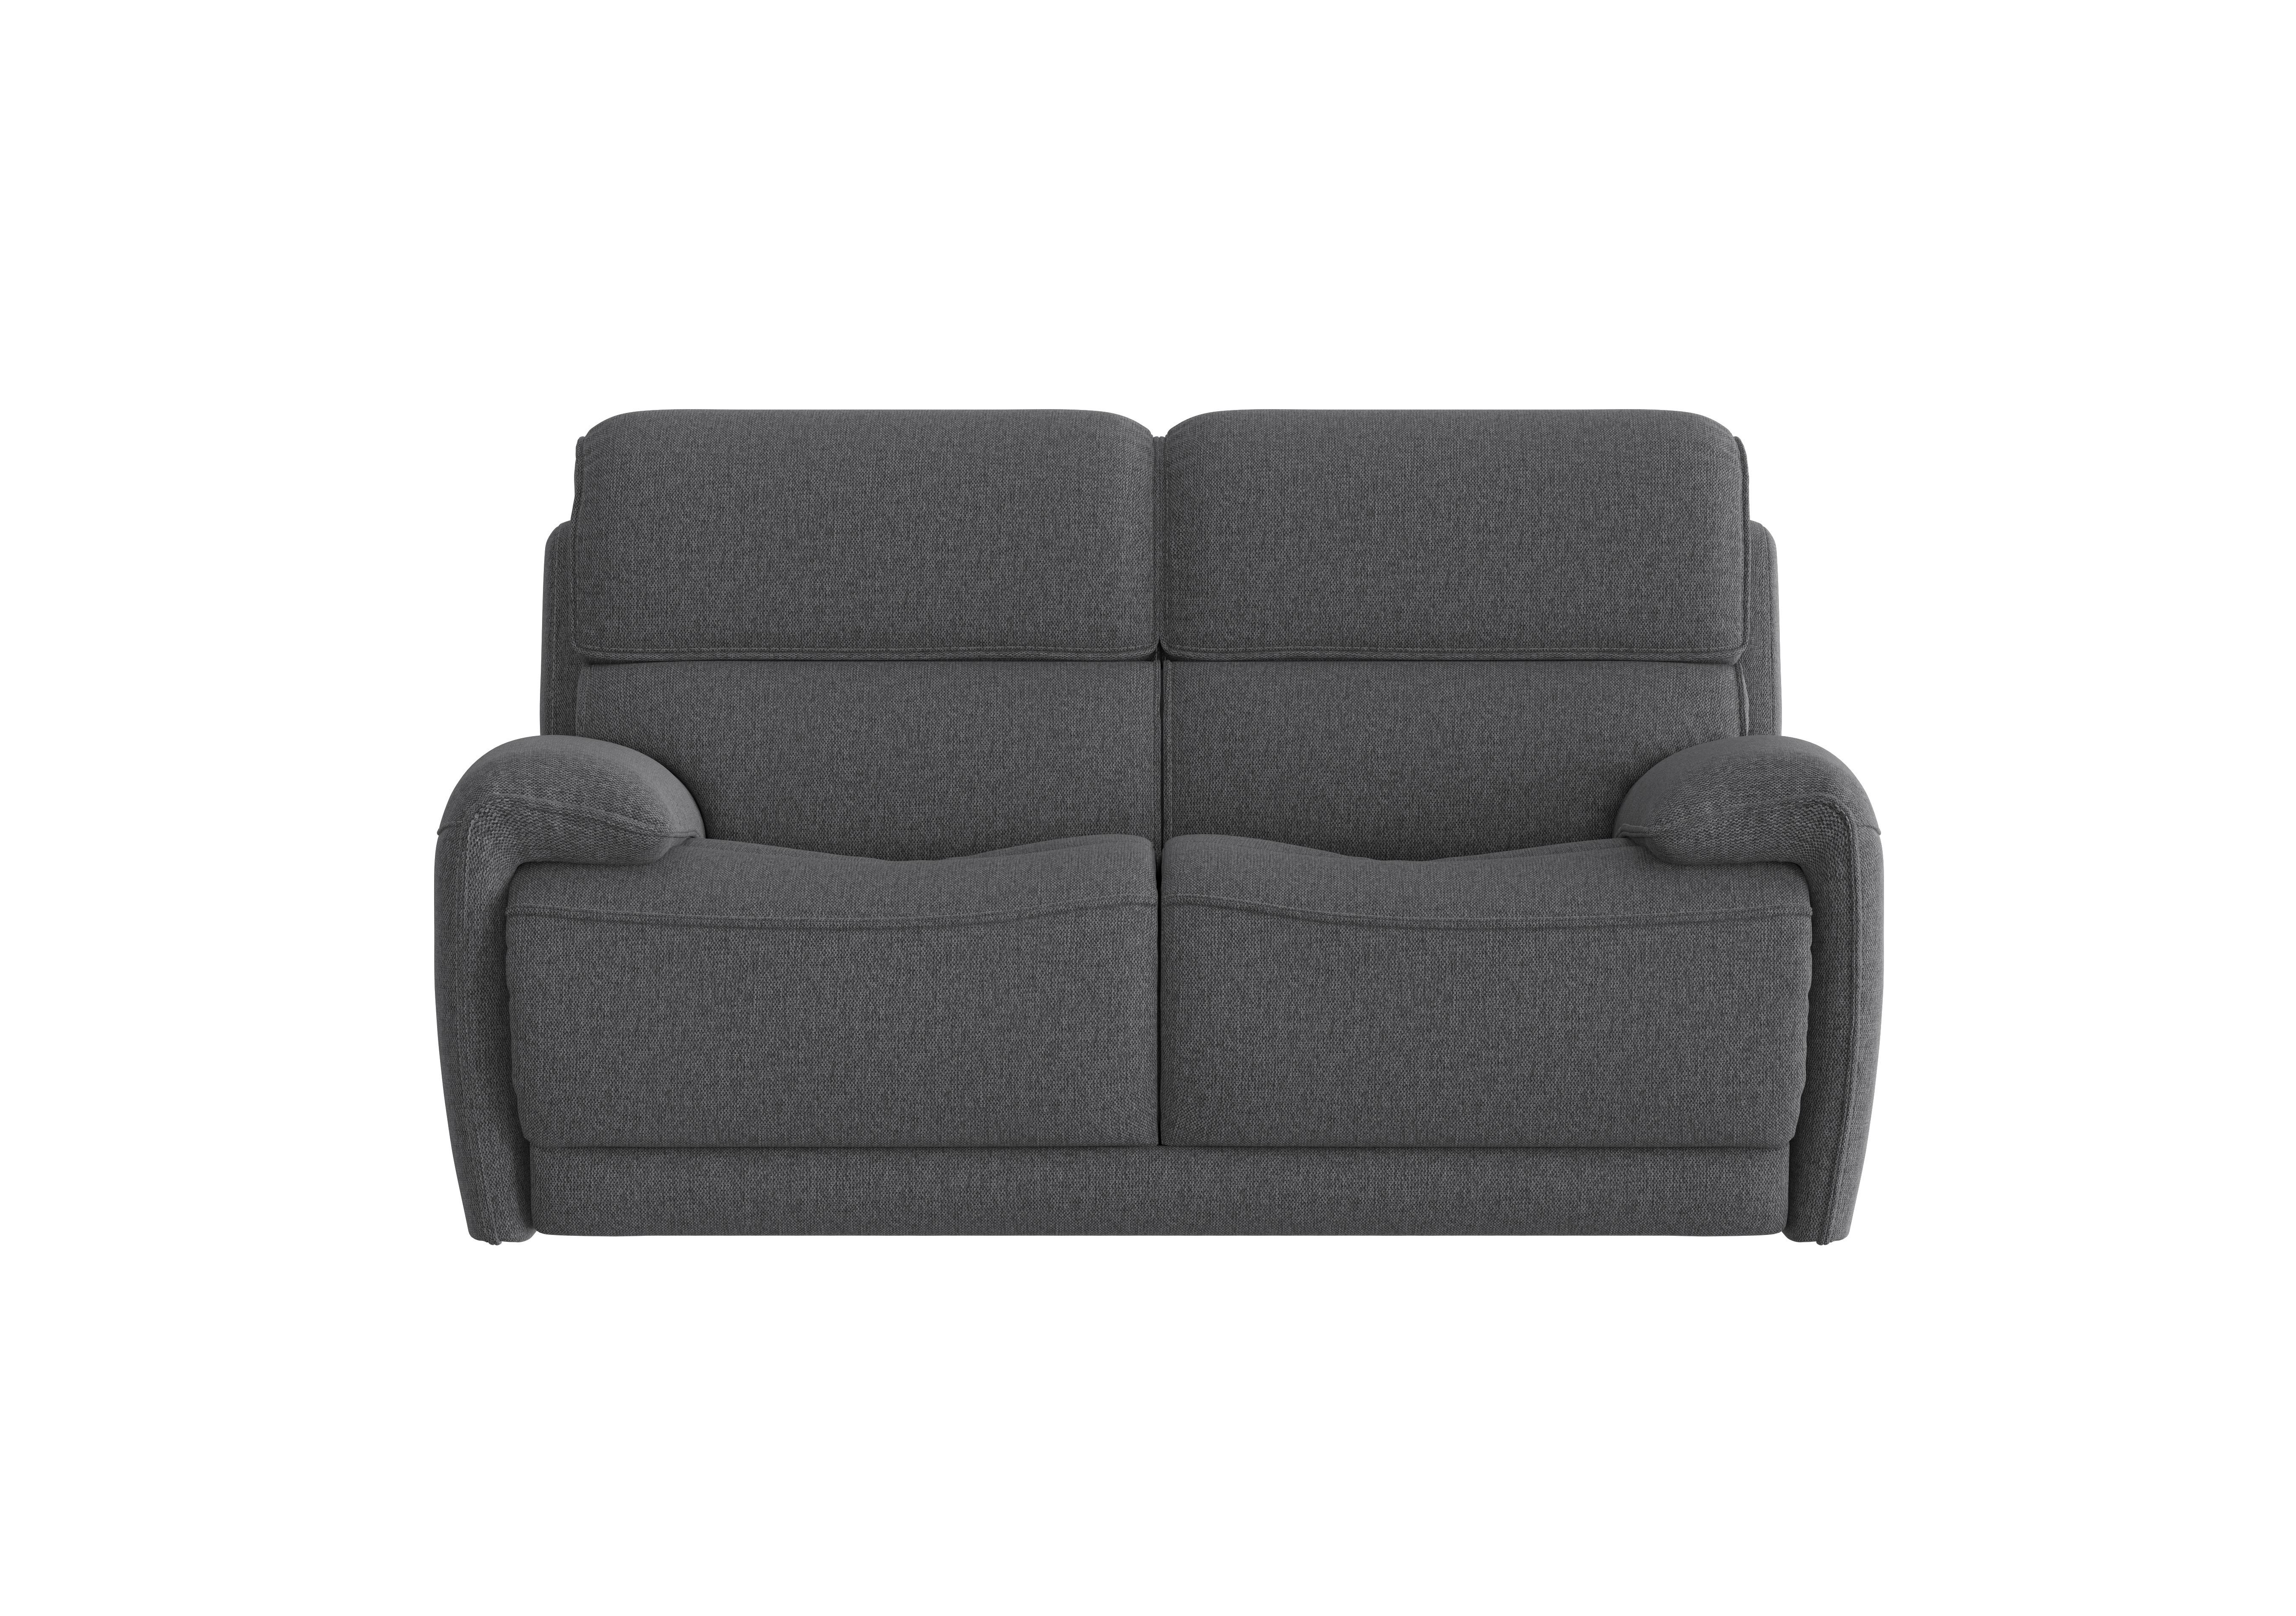 Link 2 Seater Fabric Sofa in Fab-Blt-R39 Charcoal on Furniture Village